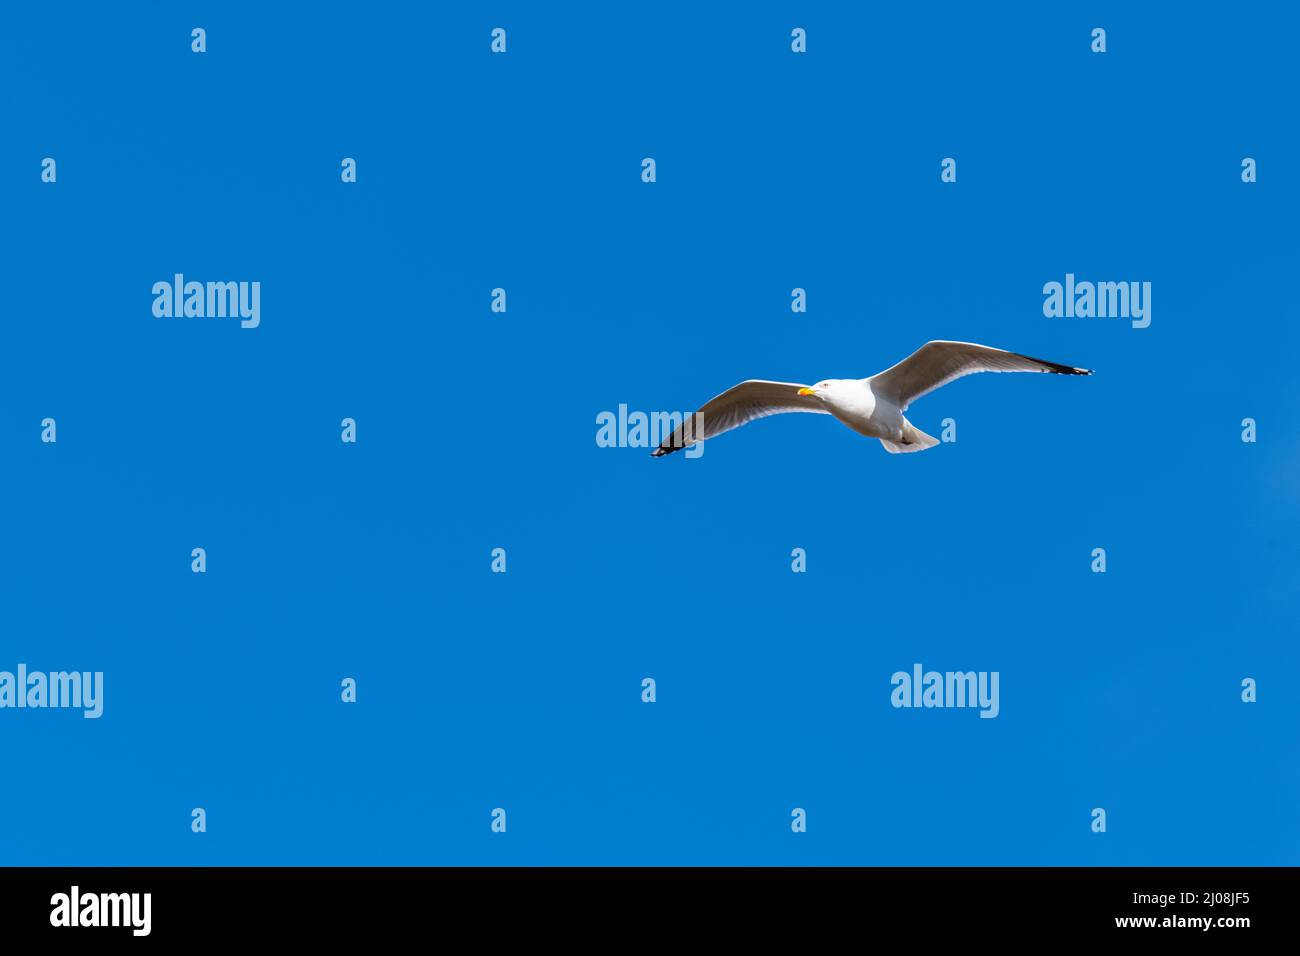 Seagulls  (Larinae) flies on blue background without clouds Stock Photo